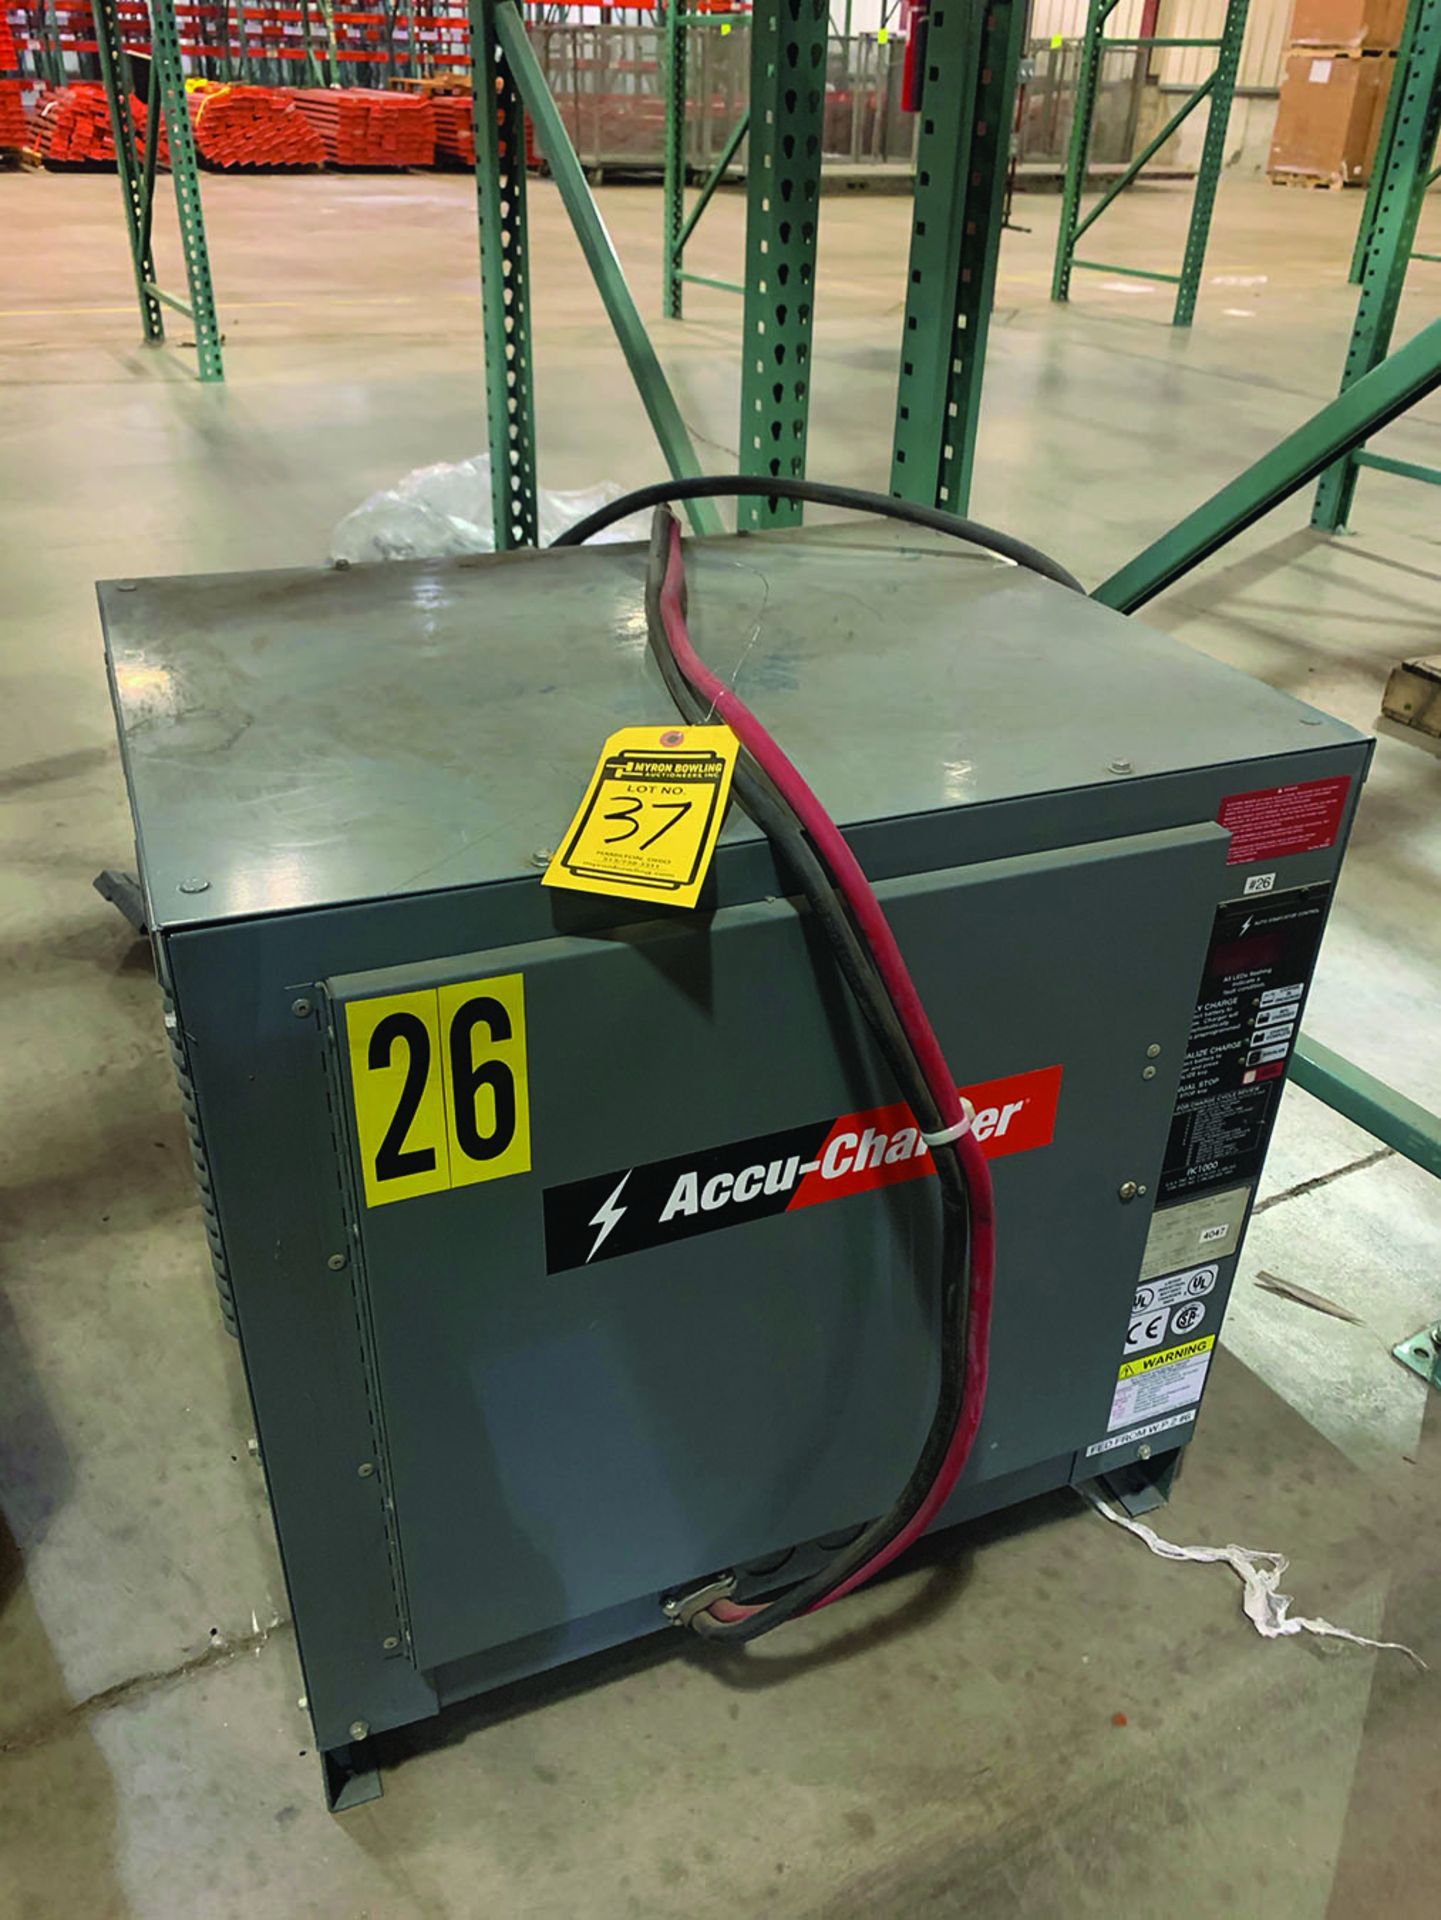 ACCU-CHARGER INDUSTRIAL BATTERY CHARGER, 480V, 3HP, MODEL 750C3-18